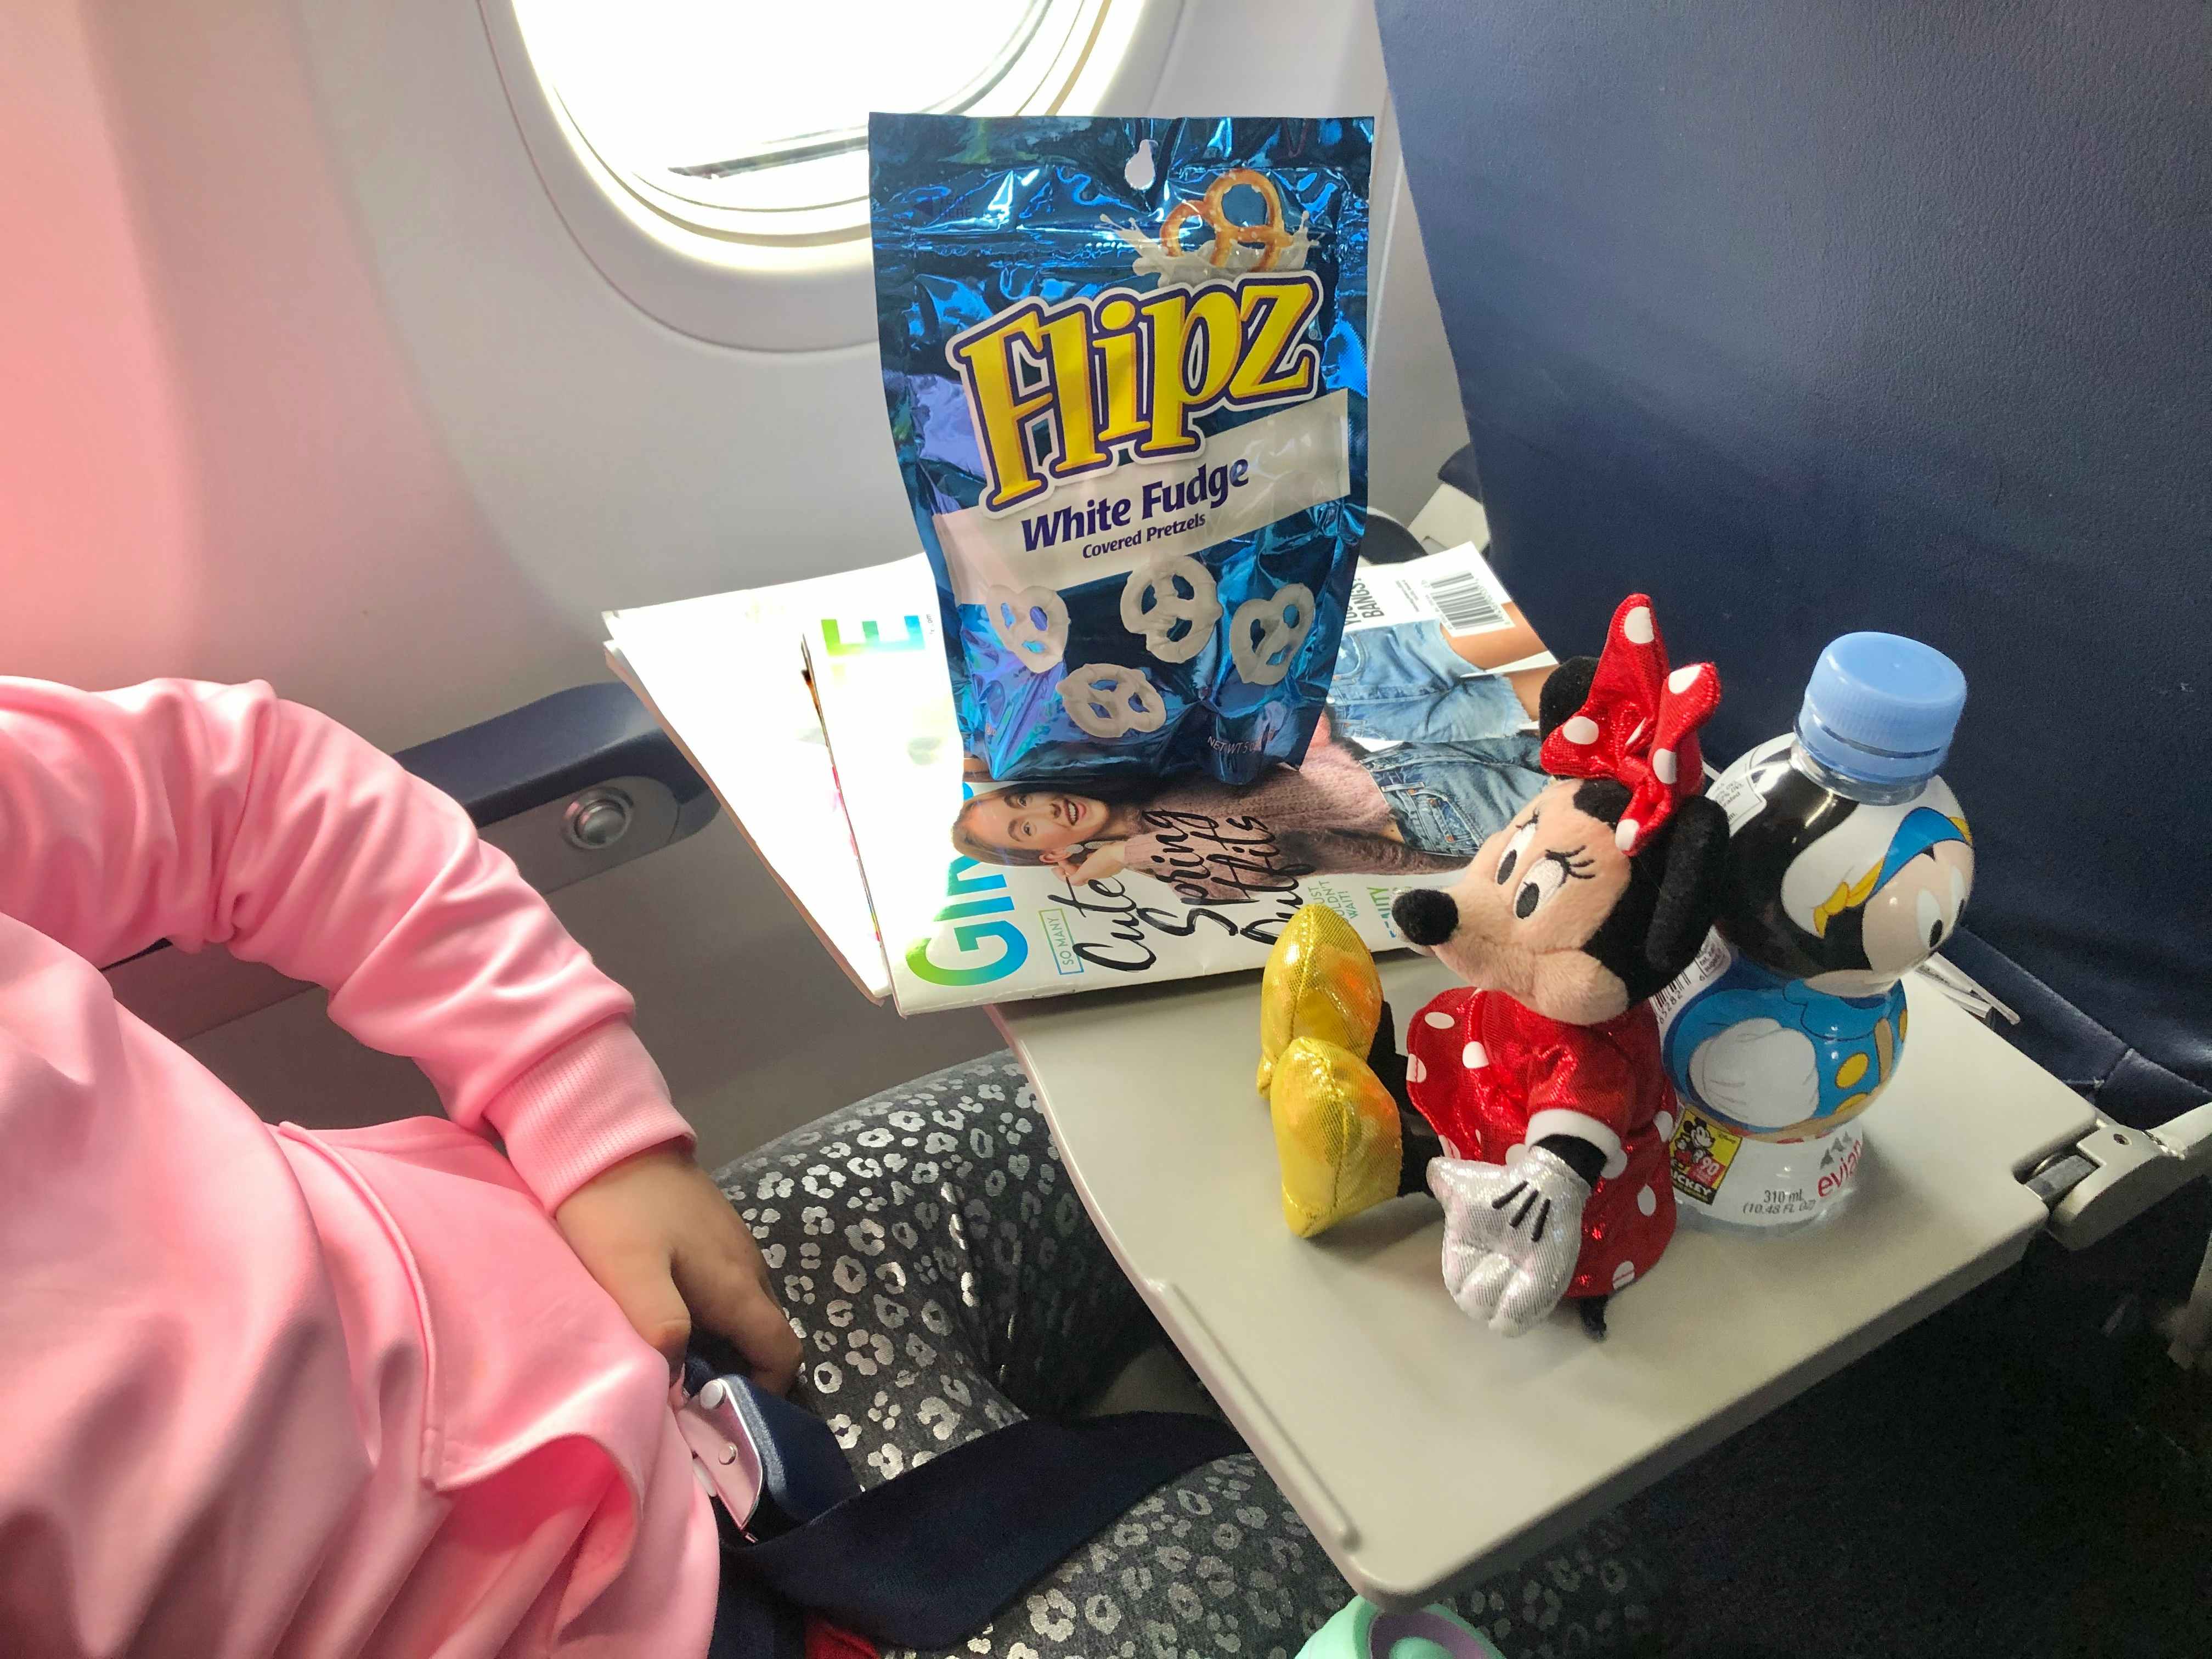 A girl sits in an airplane with a Mini mouse doll and snacks on her tray table.